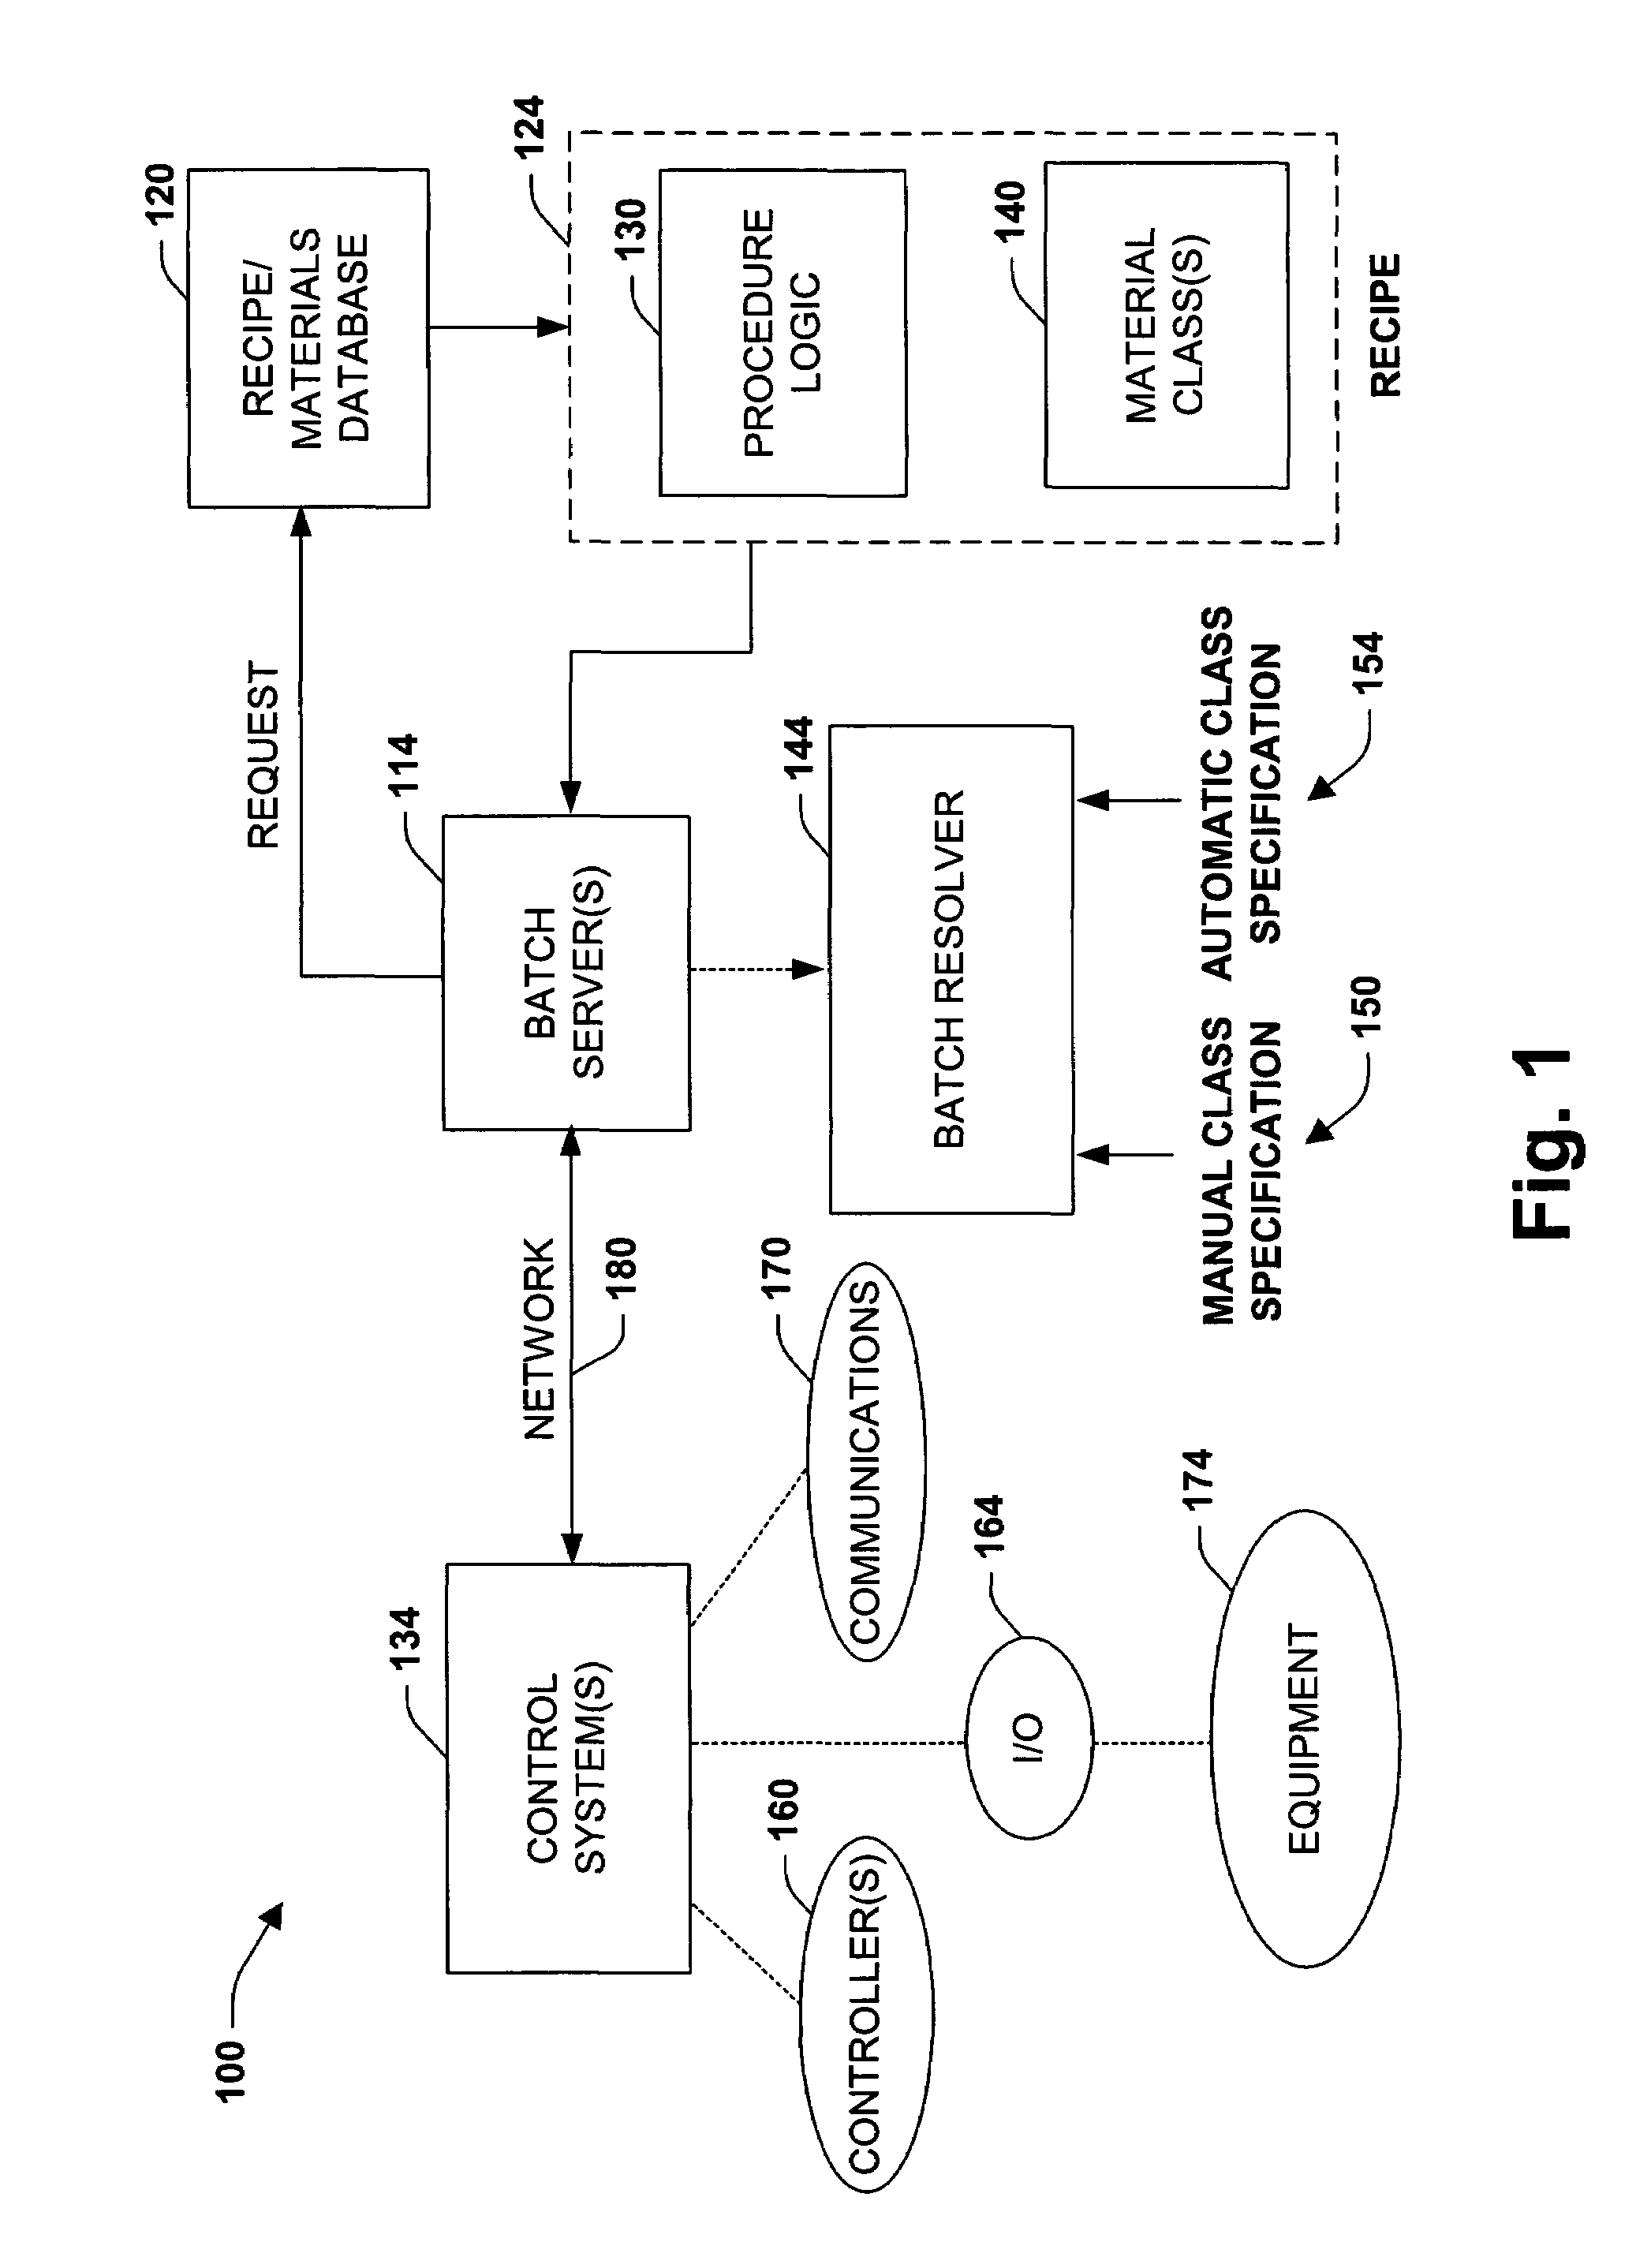 Material classification system and methods